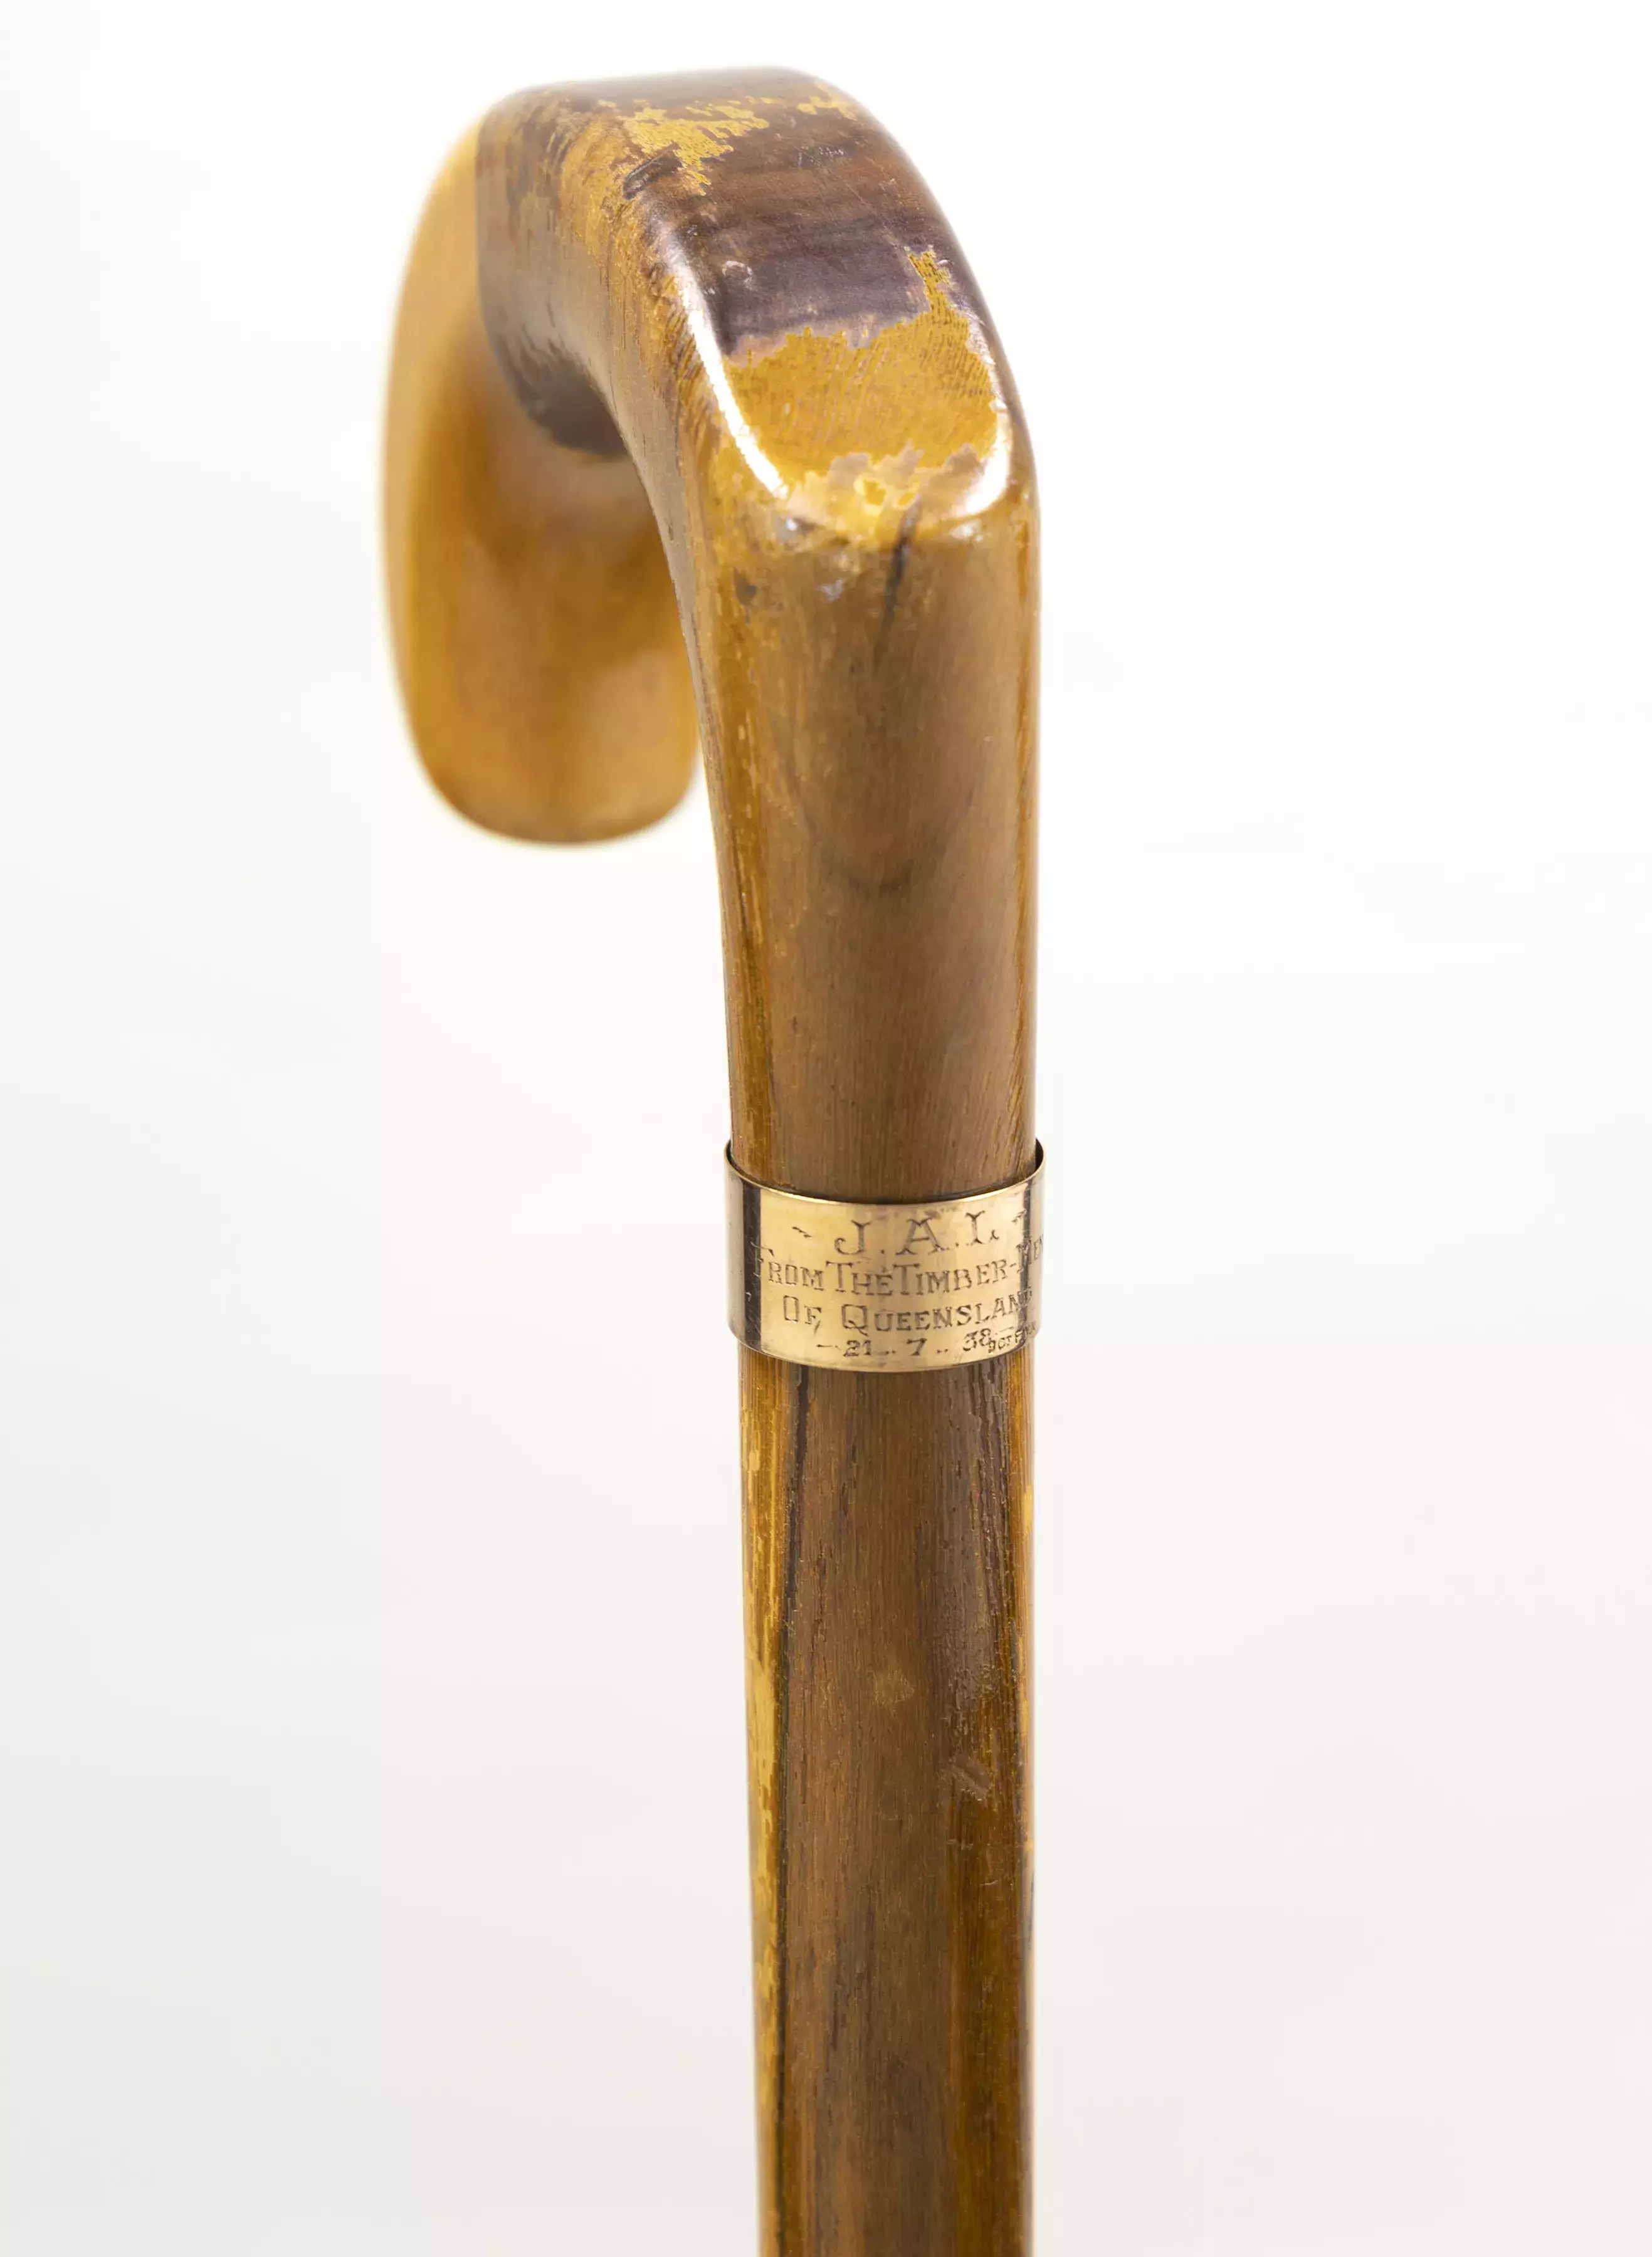 A close up view of the top of Lyons' walking stick showing a metal label inscribed with 'Timber Men of Queensland'.  